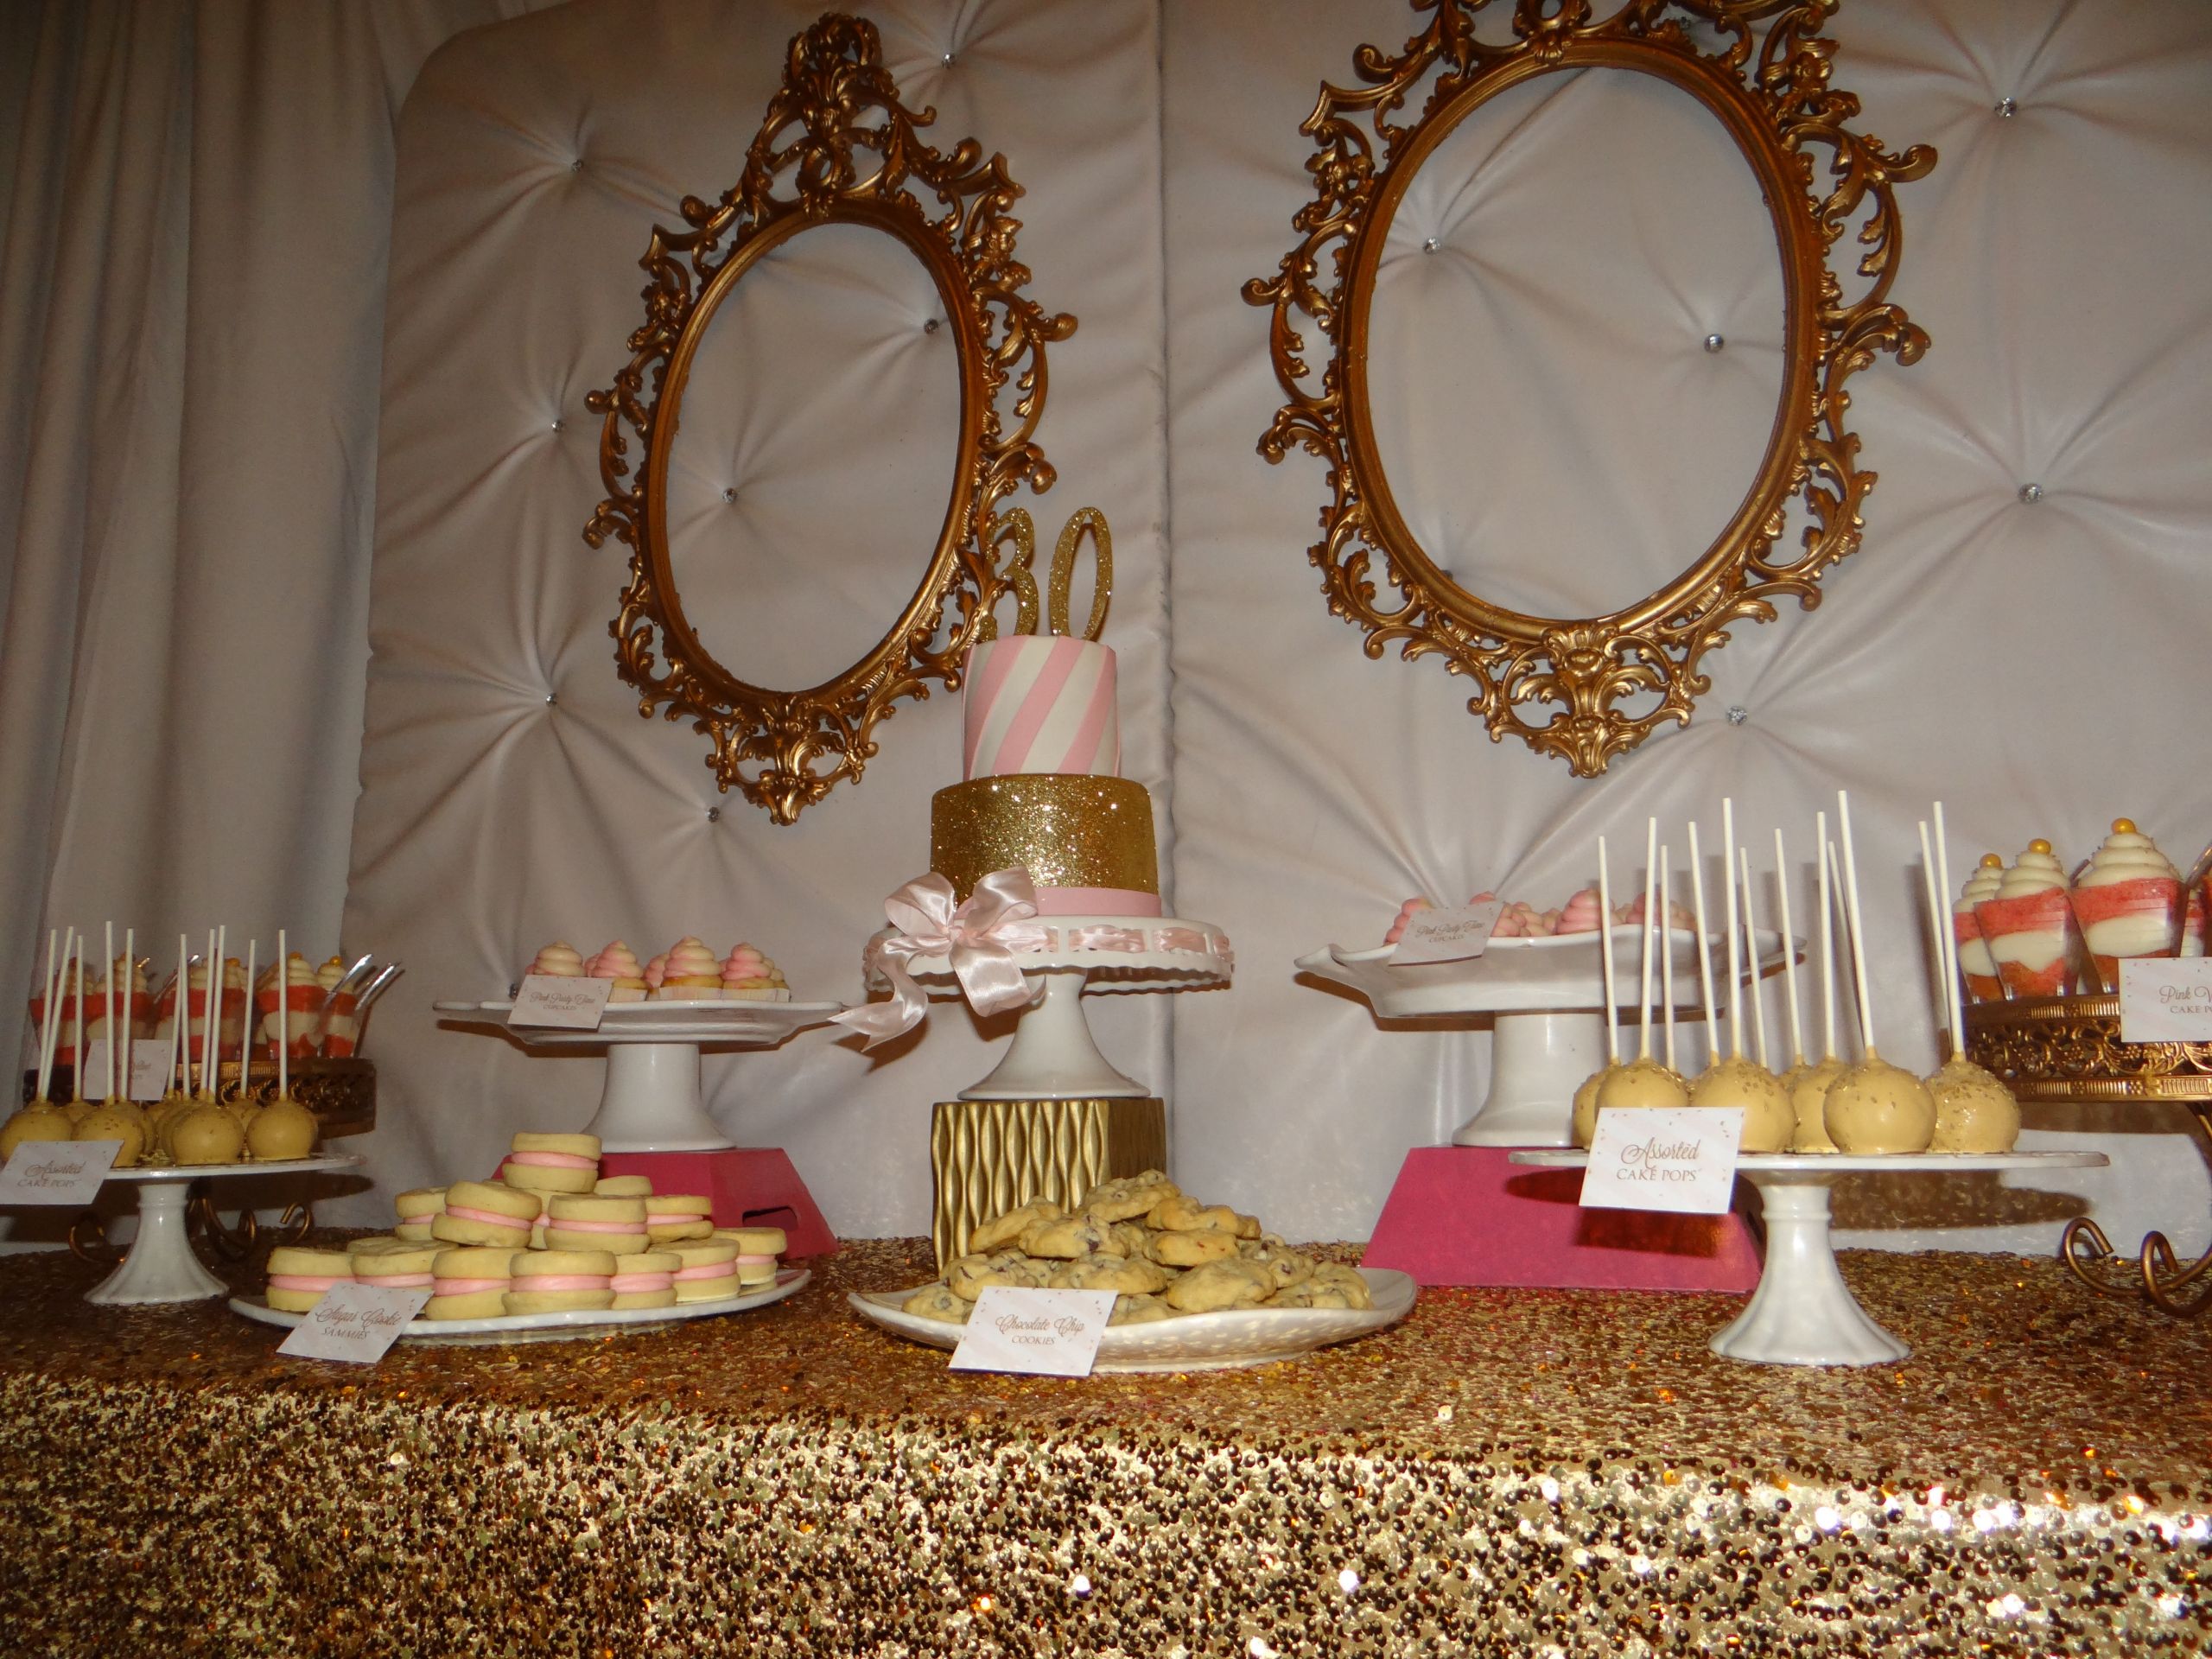 30th Birthday Decorations
 A Poppin 30th Birthday 24 7 Events